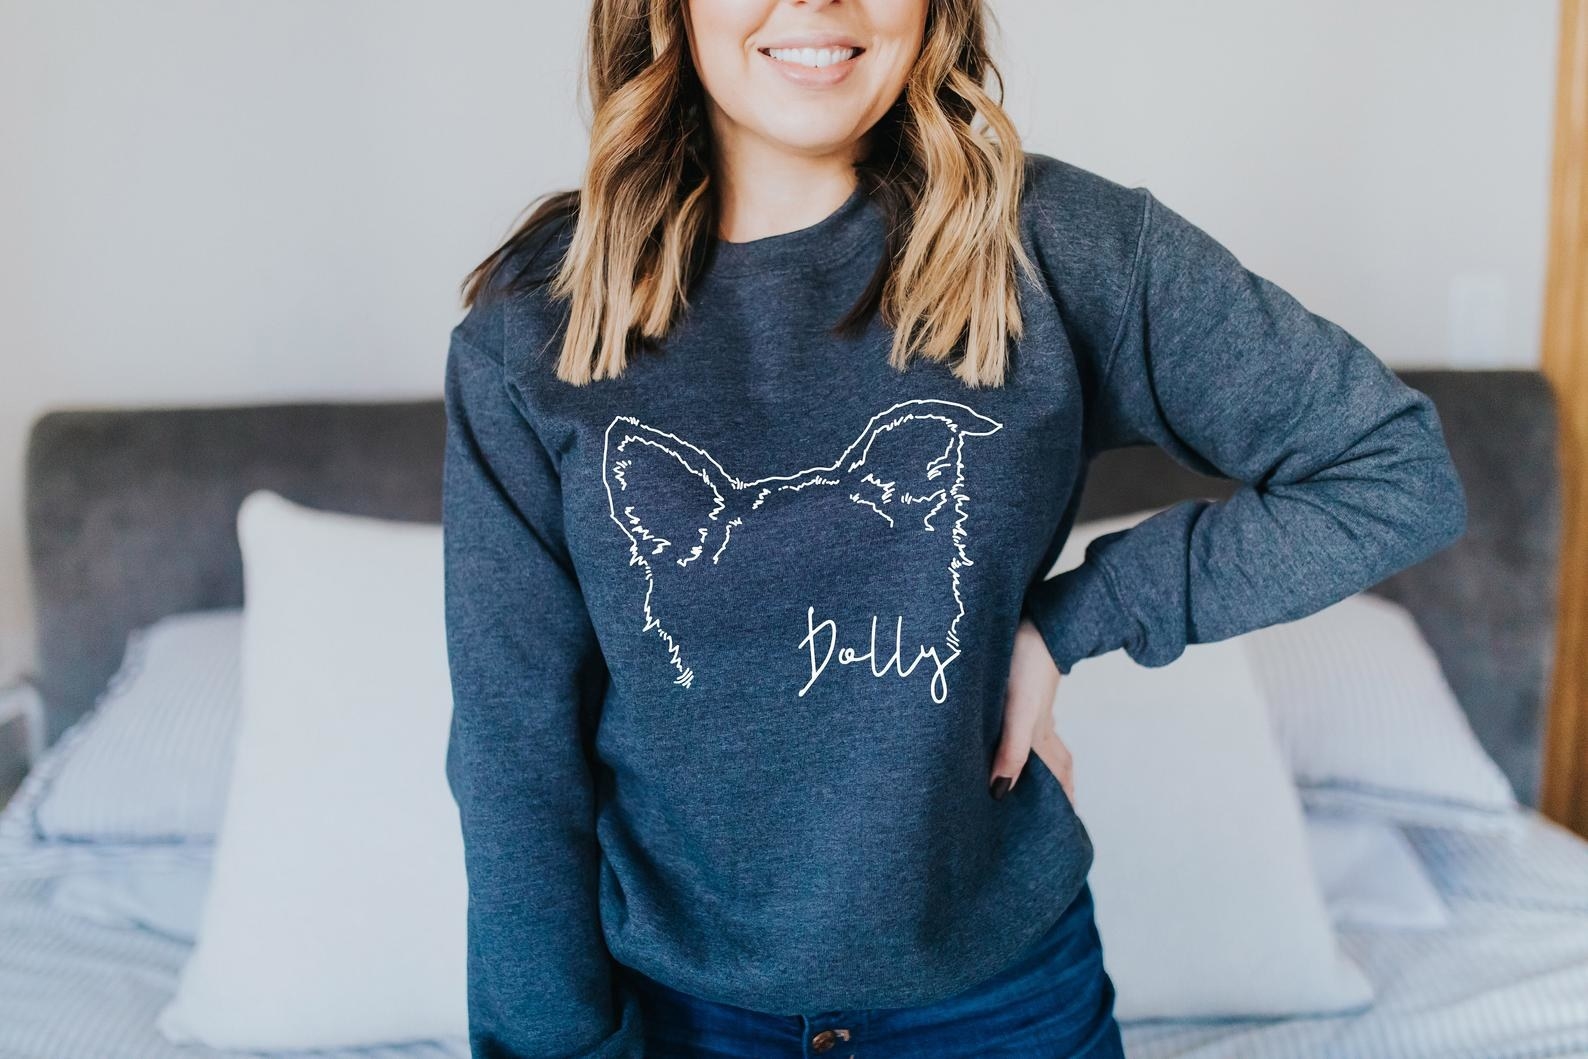 Woman wearing a navy blue version of the sweatshirt with the illustration of outlines of the ears of a dog and the name &quot;Dolly&quot;